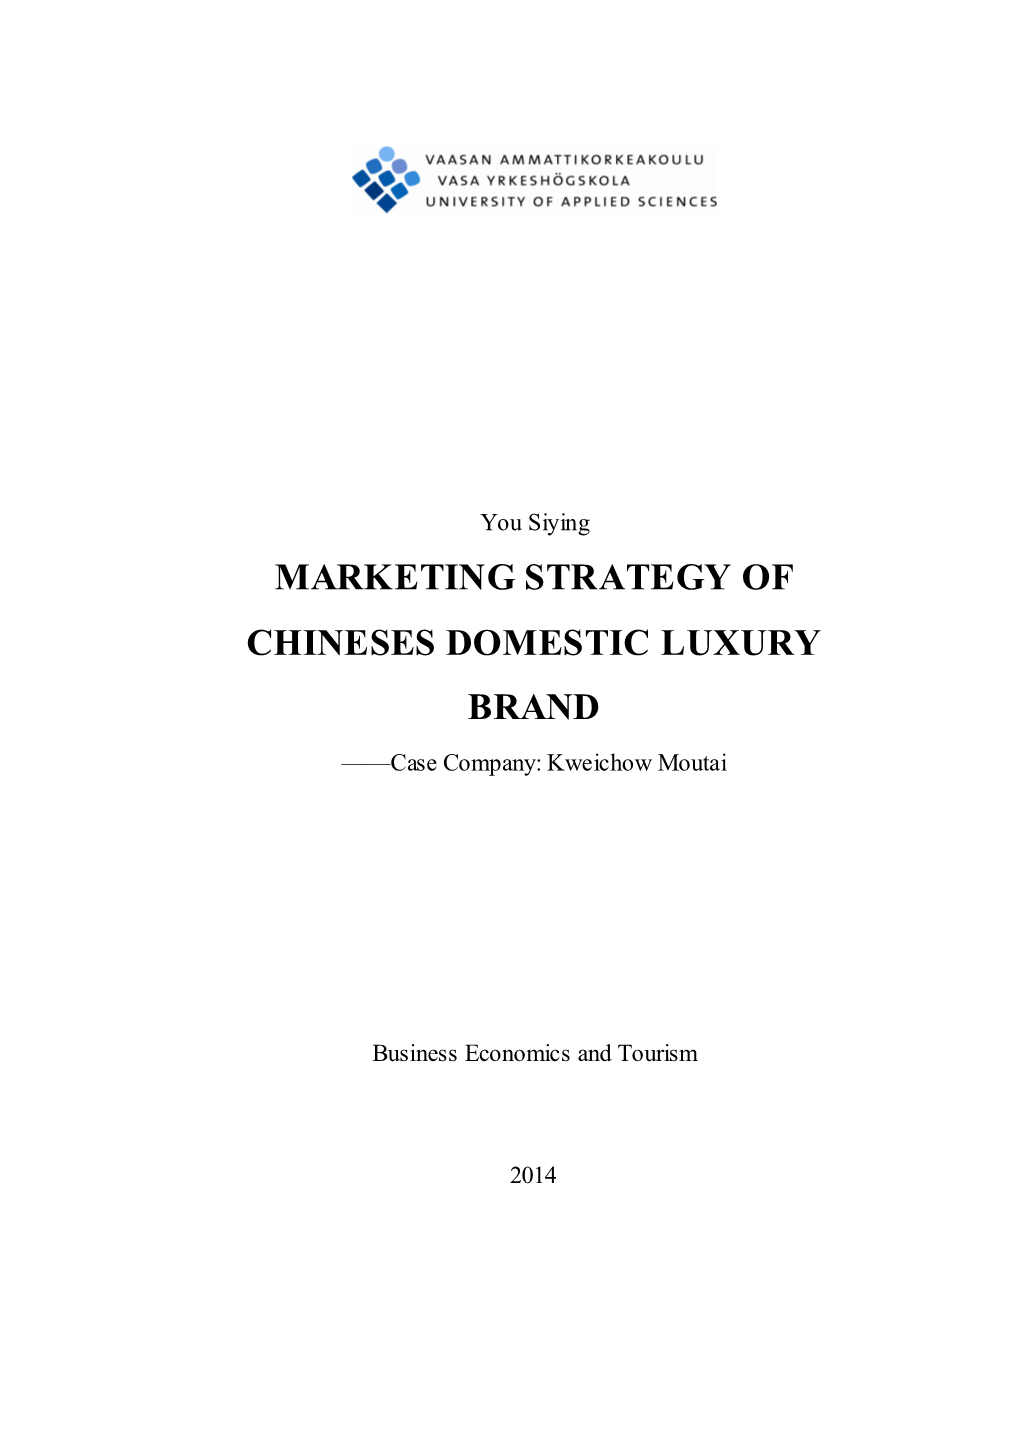 MARKETING STRATEGY of CHINESES DOMESTIC LUXURY BRAND ——Case Company: Kweichow Moutai